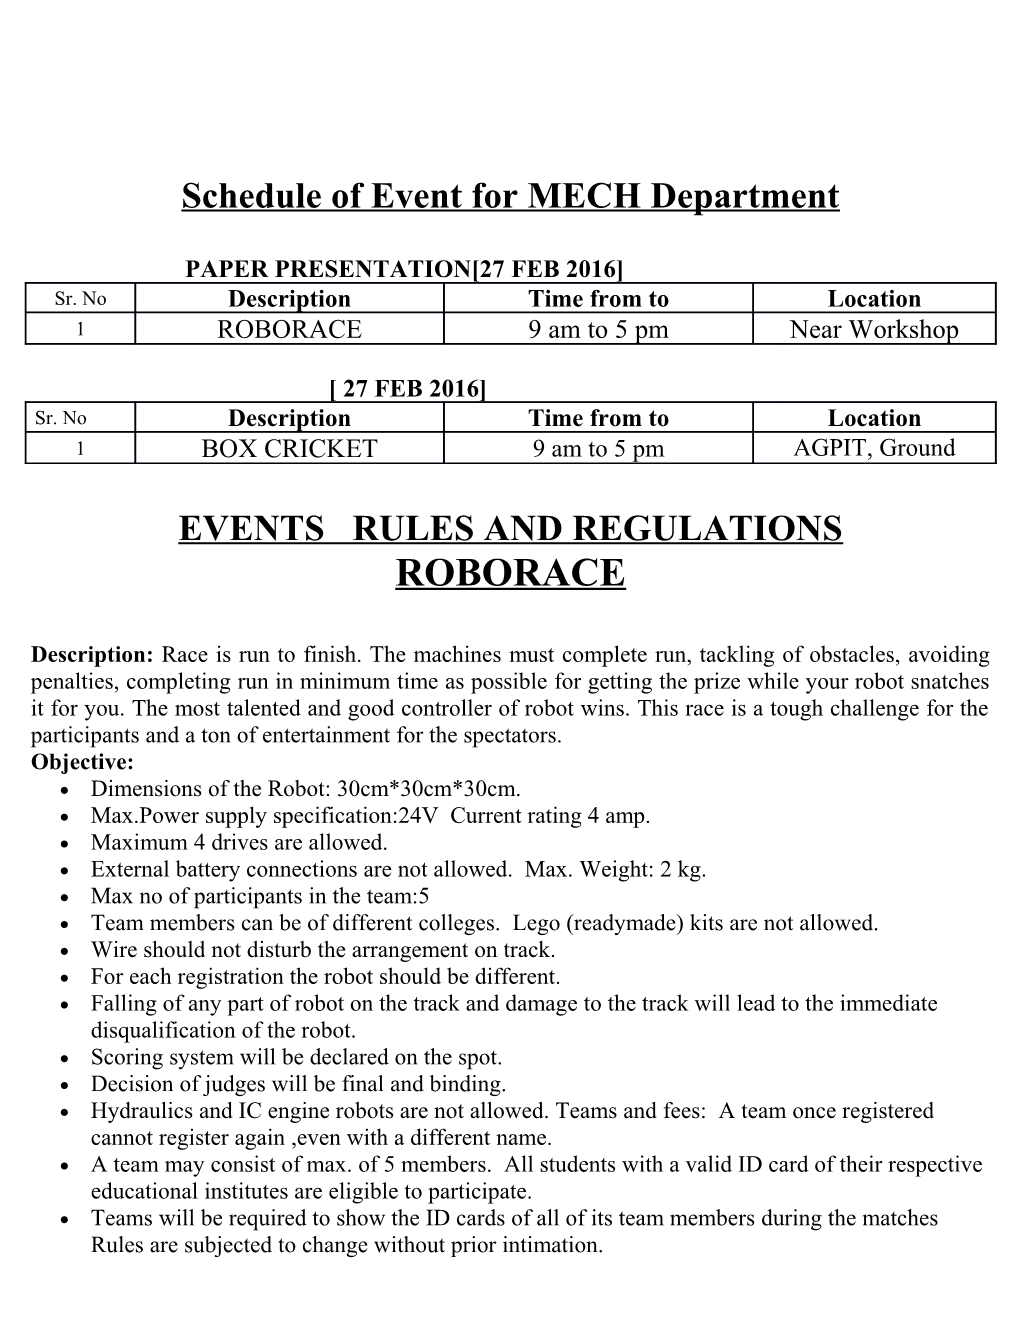 Events Rules and Regulations